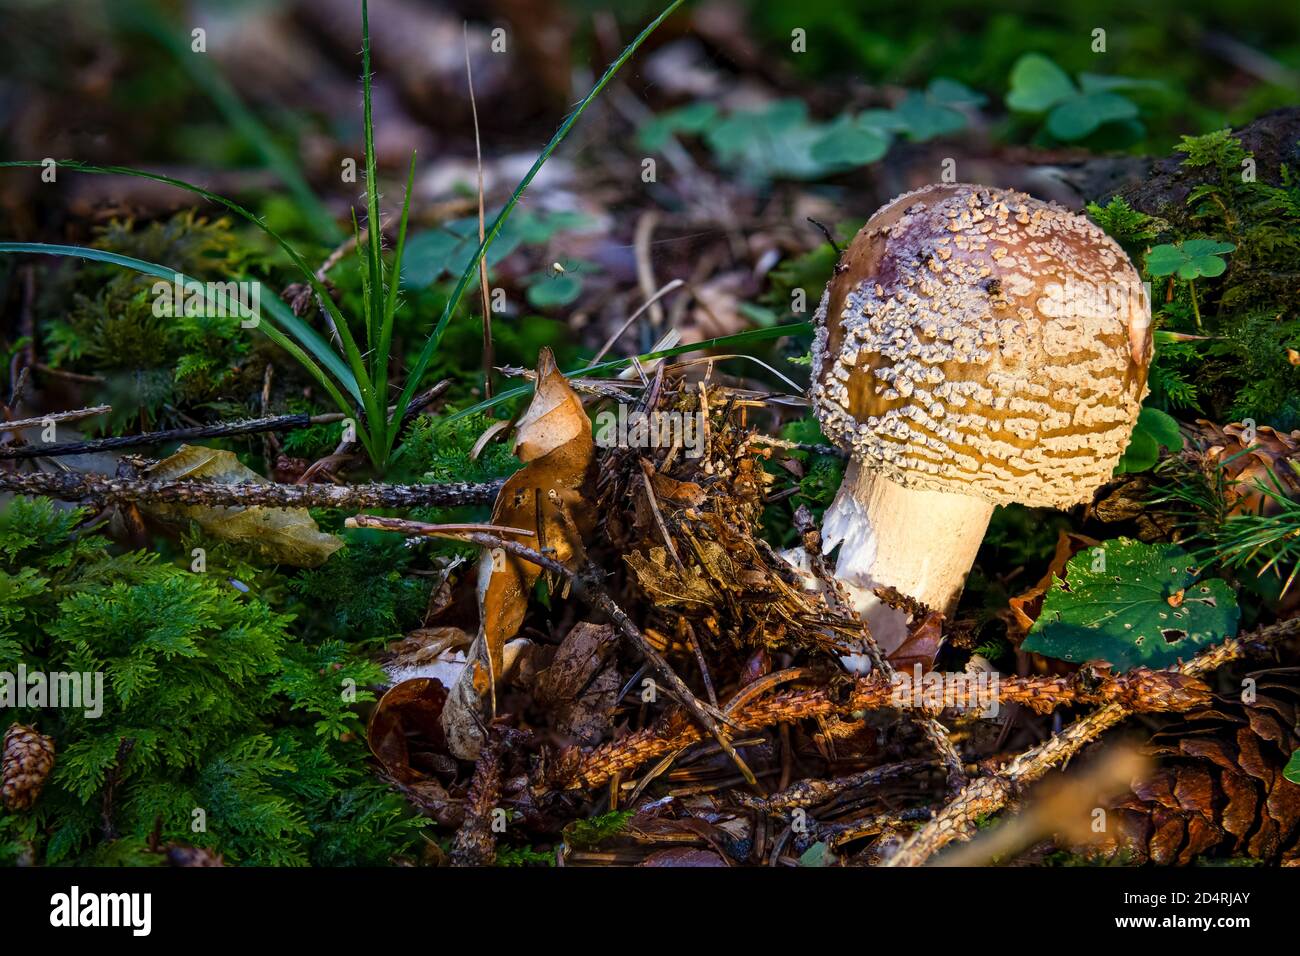 The blusher is the common name for several closely related species of the genus Amanita rubescens and novinupta. Stock Photo